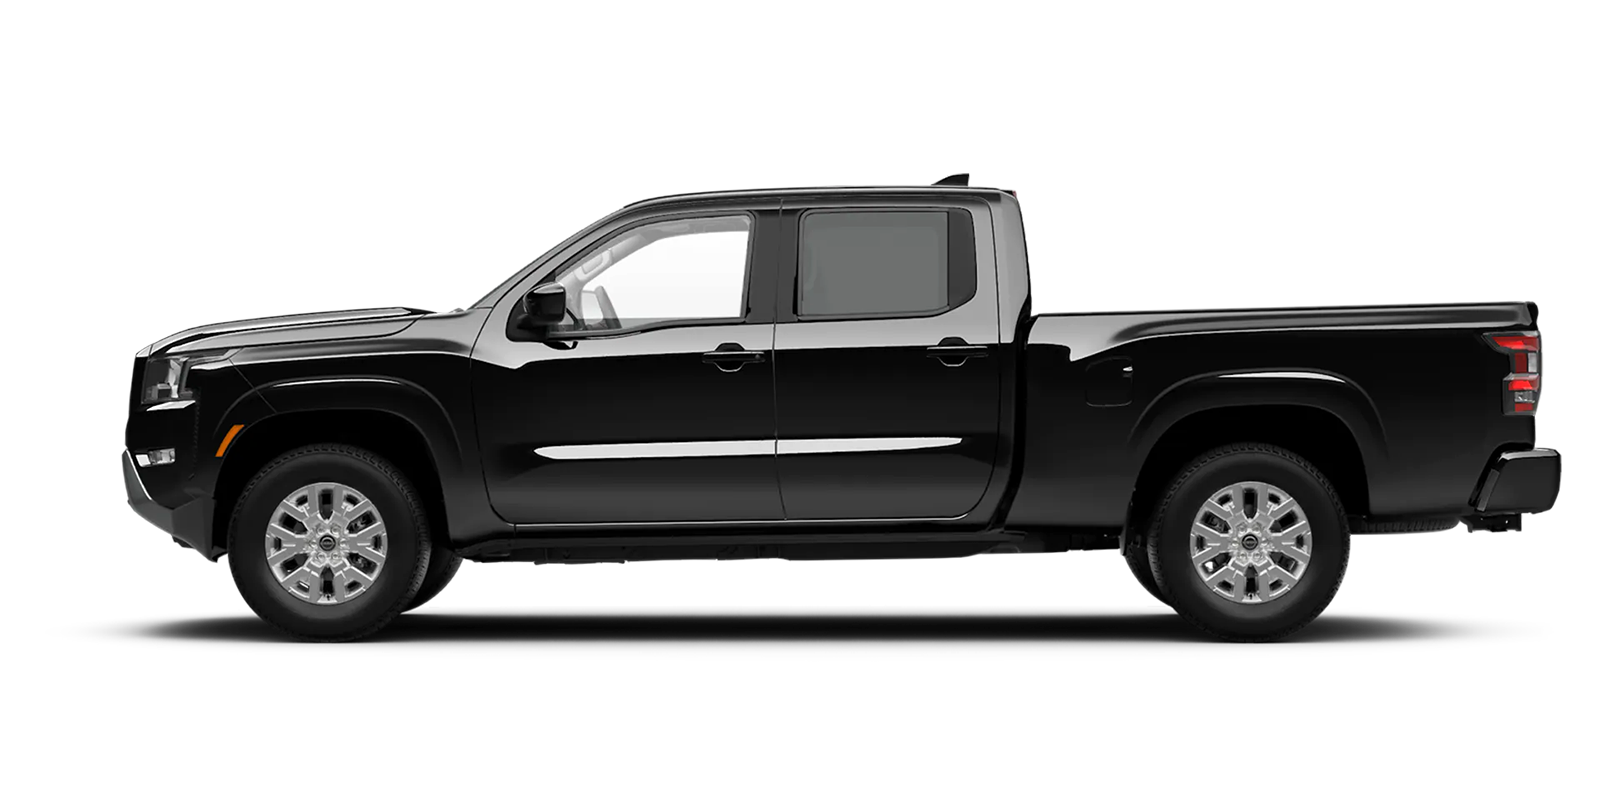 2022 Frontier Crew Cab Long Bed SV 4x2 in Super Black | Grainger Nissan of Anderson in Anderson SC